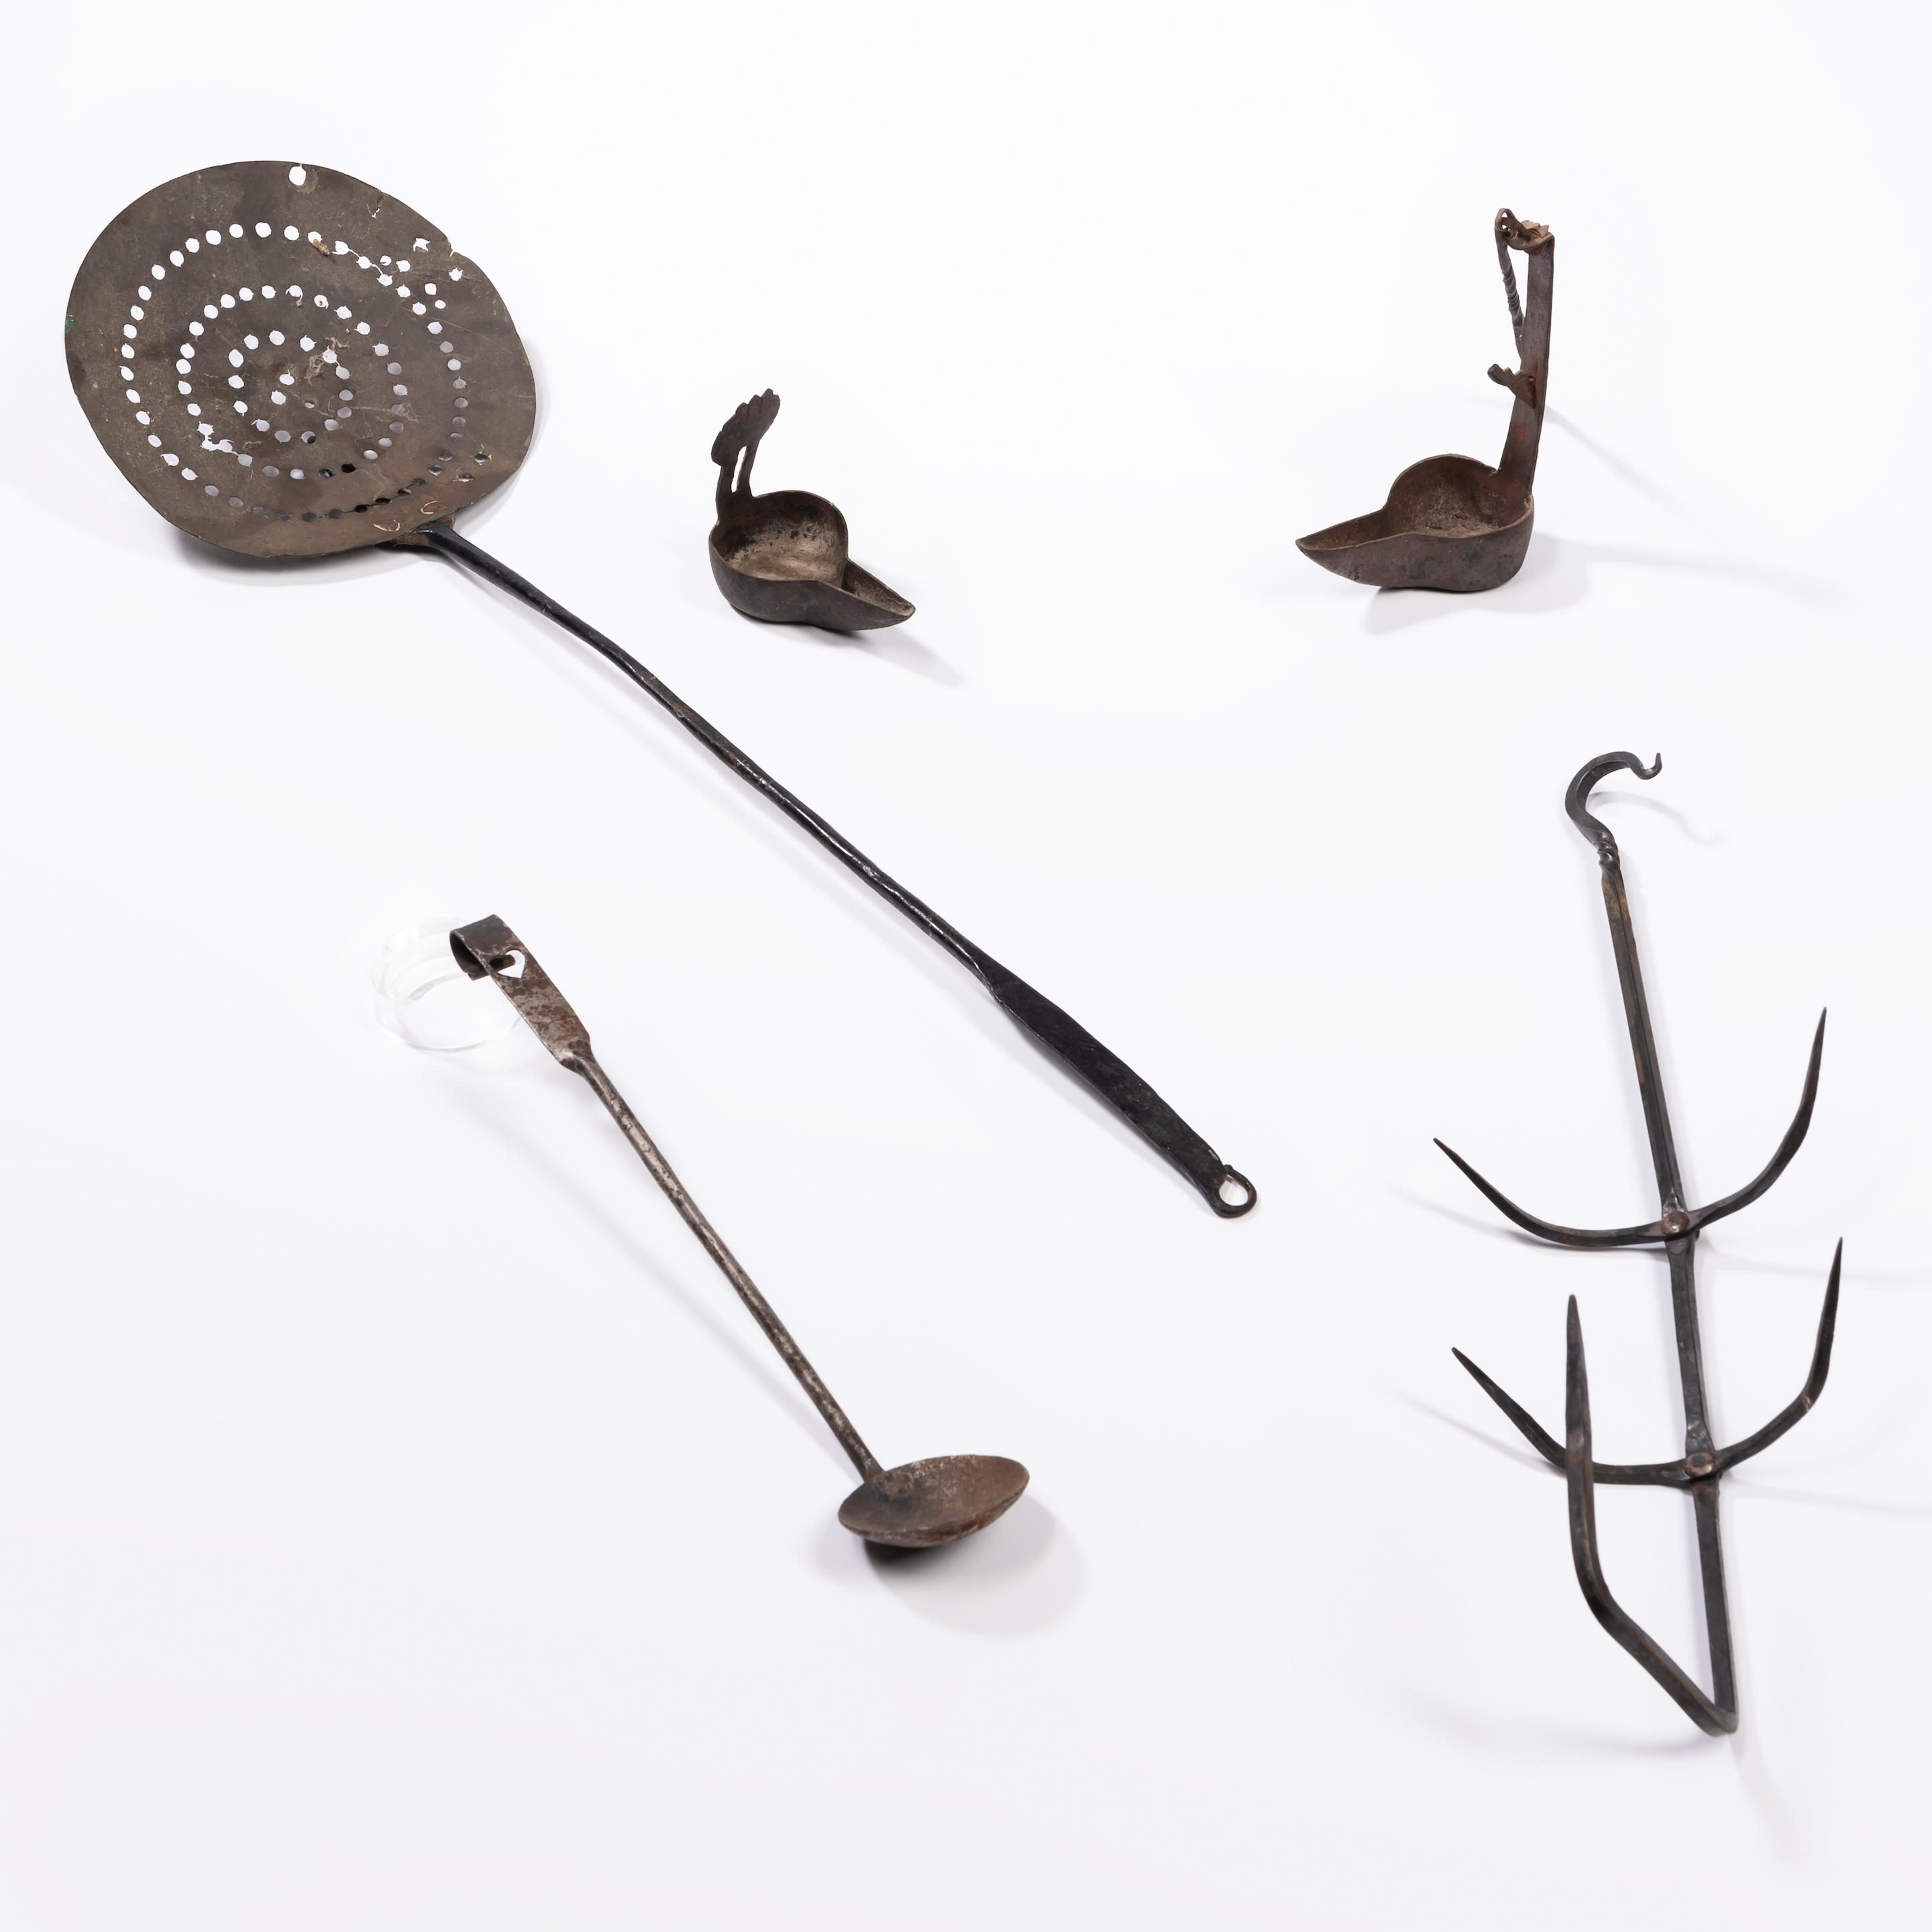 FIVE WROUGHT IRON IMPLEMENTS including 3ae764